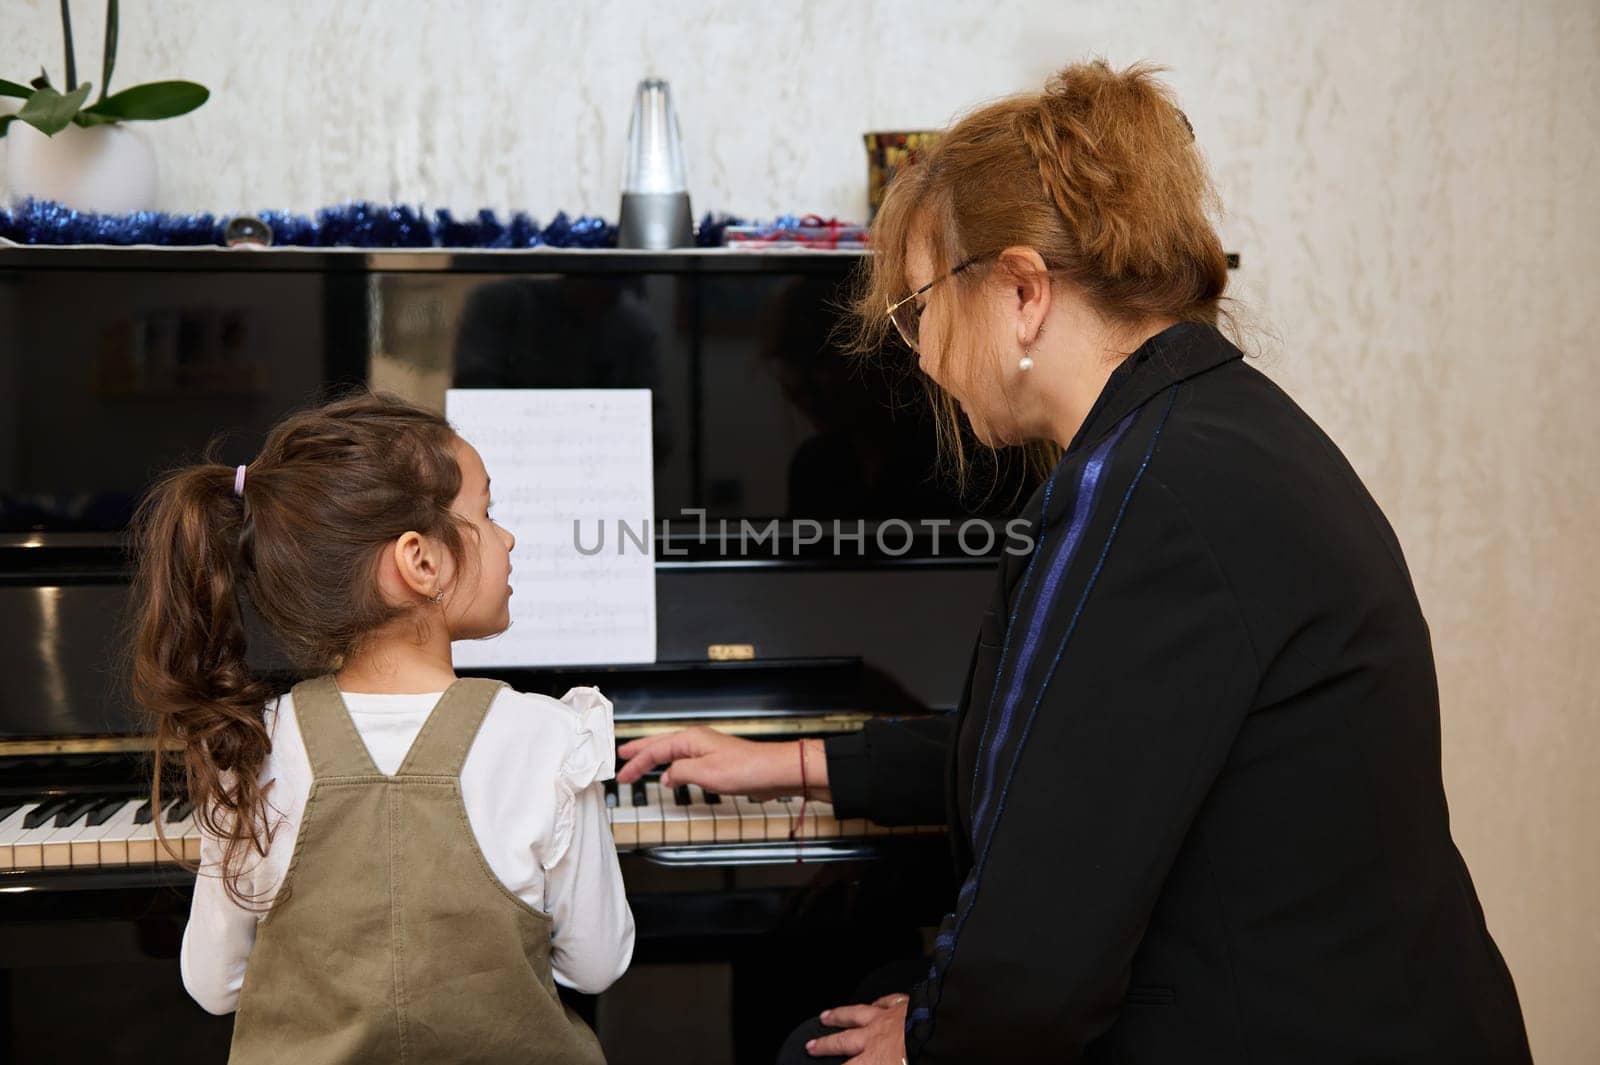 Rear view mature woman, pianist teacher giving music lesson to a smart child girl, teaching her playing on grand piano by artgf